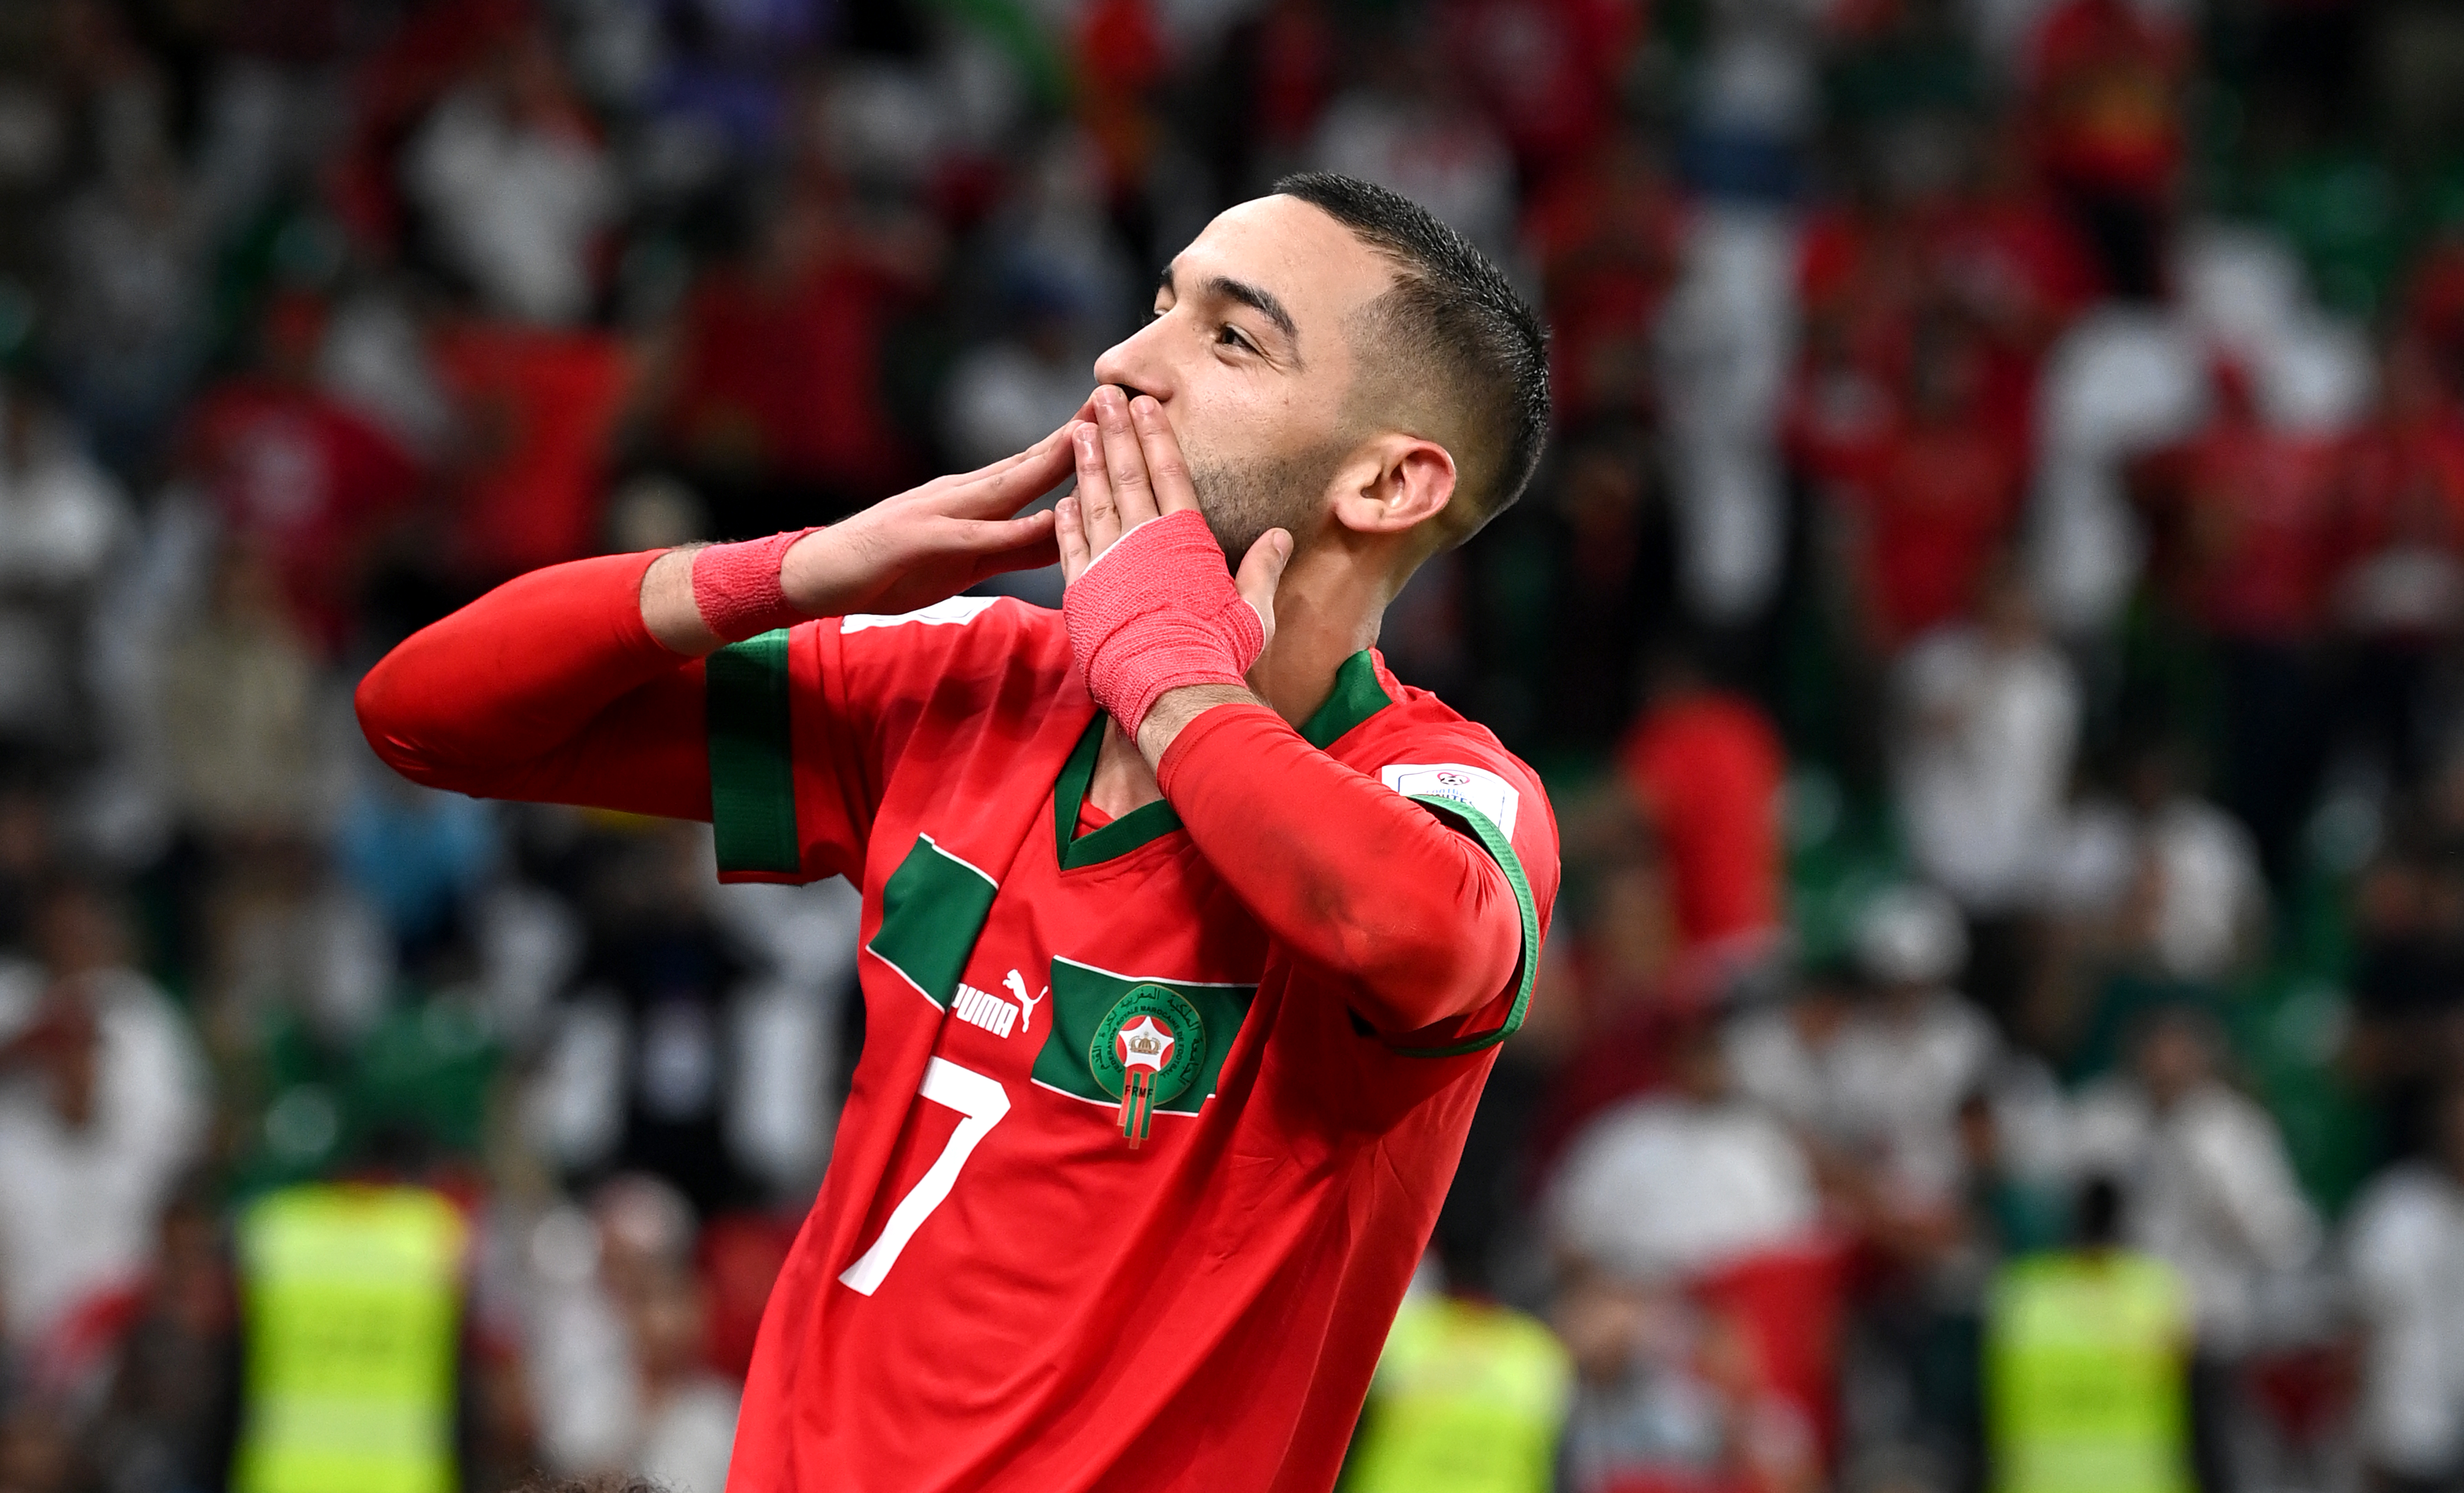 hakim-ziyech-donates-2022-world-cup-earnings-to-poor-in-morocco